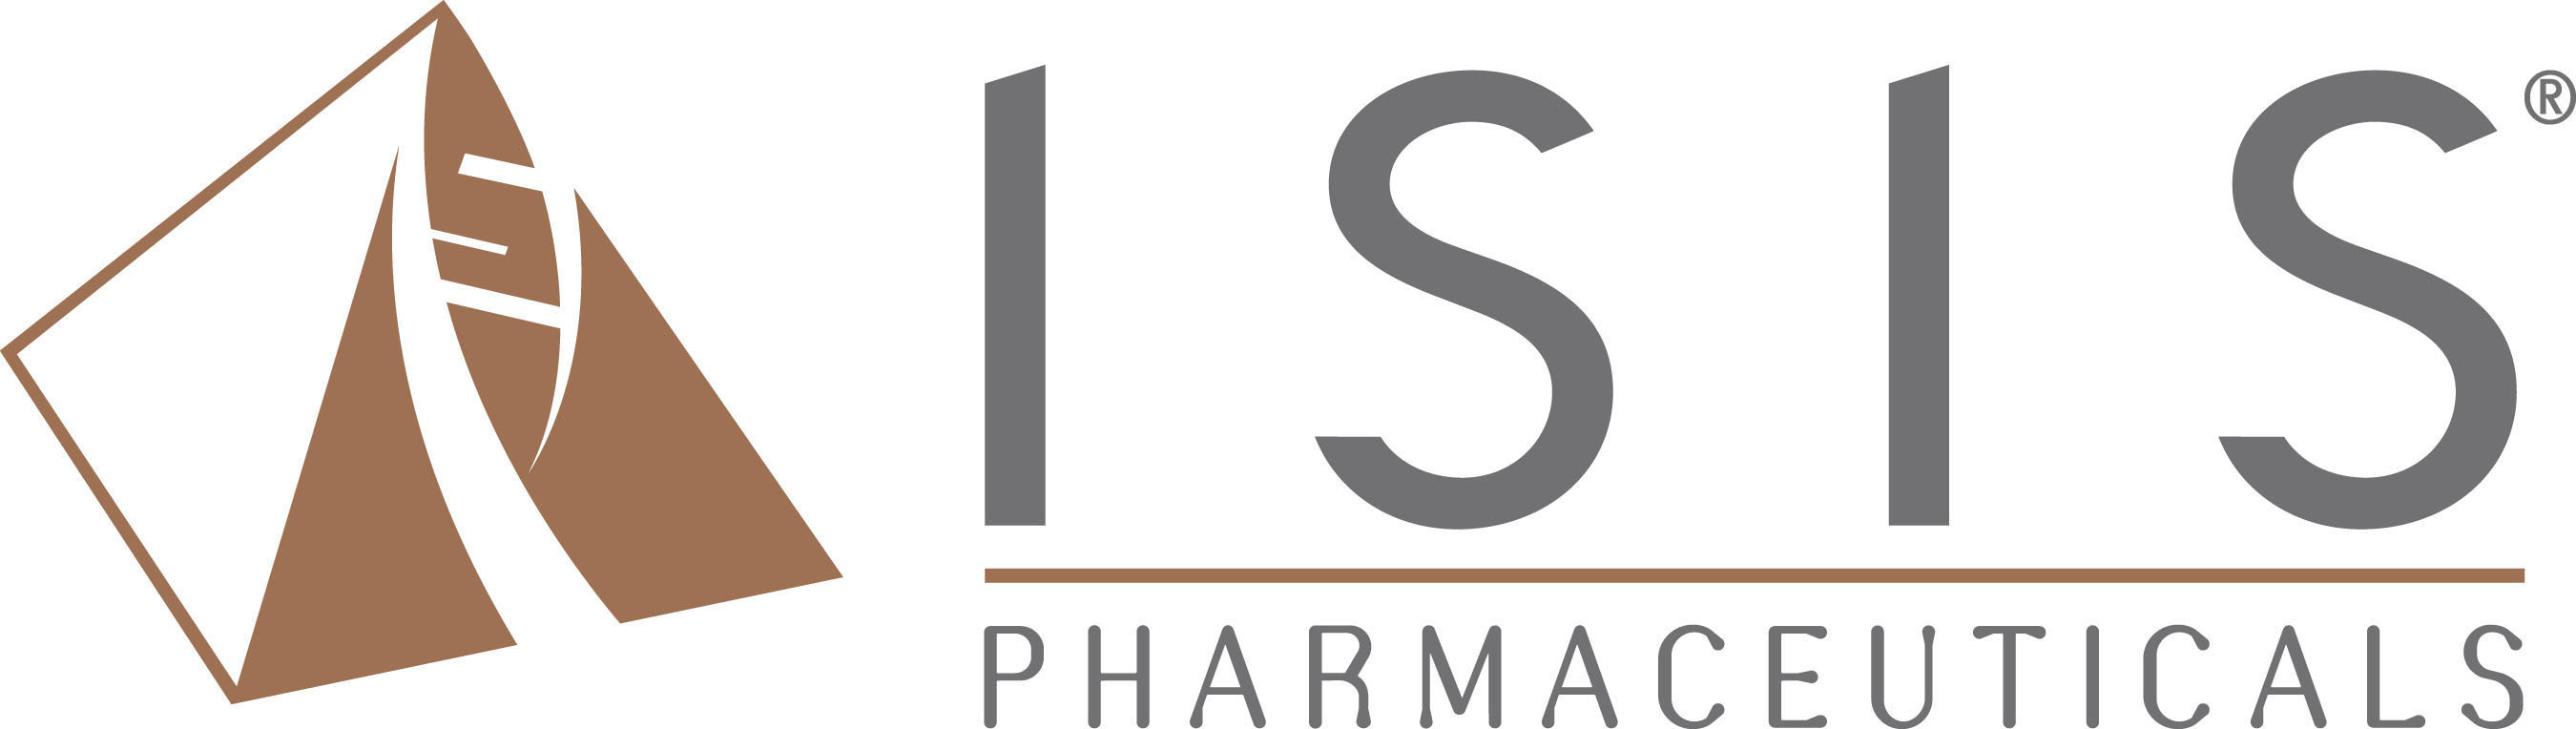 Biogen Idec and Isis Pharmaceuticals Collabore to Advance Treatment of Neur ological Disorders